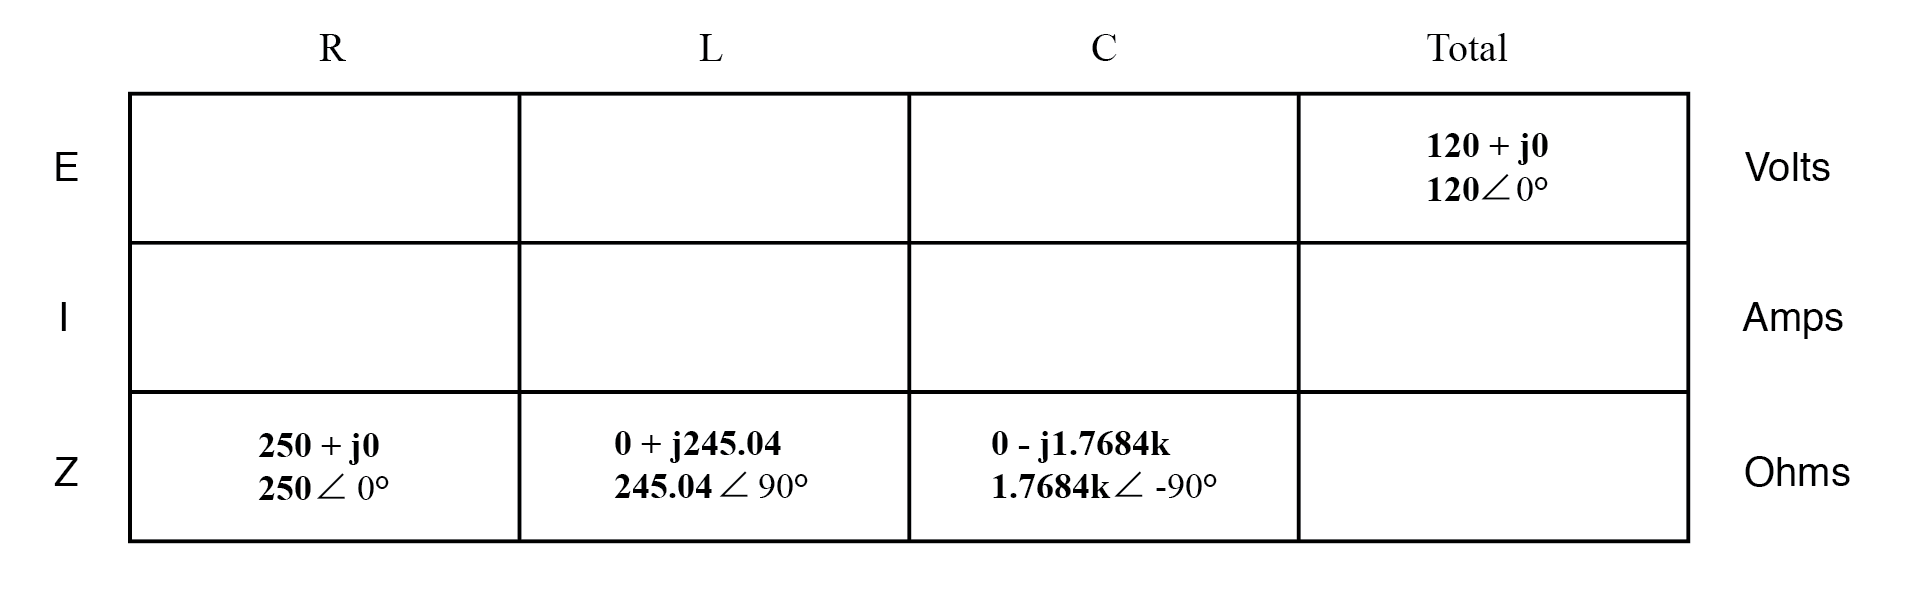 components values express as impedance image 1